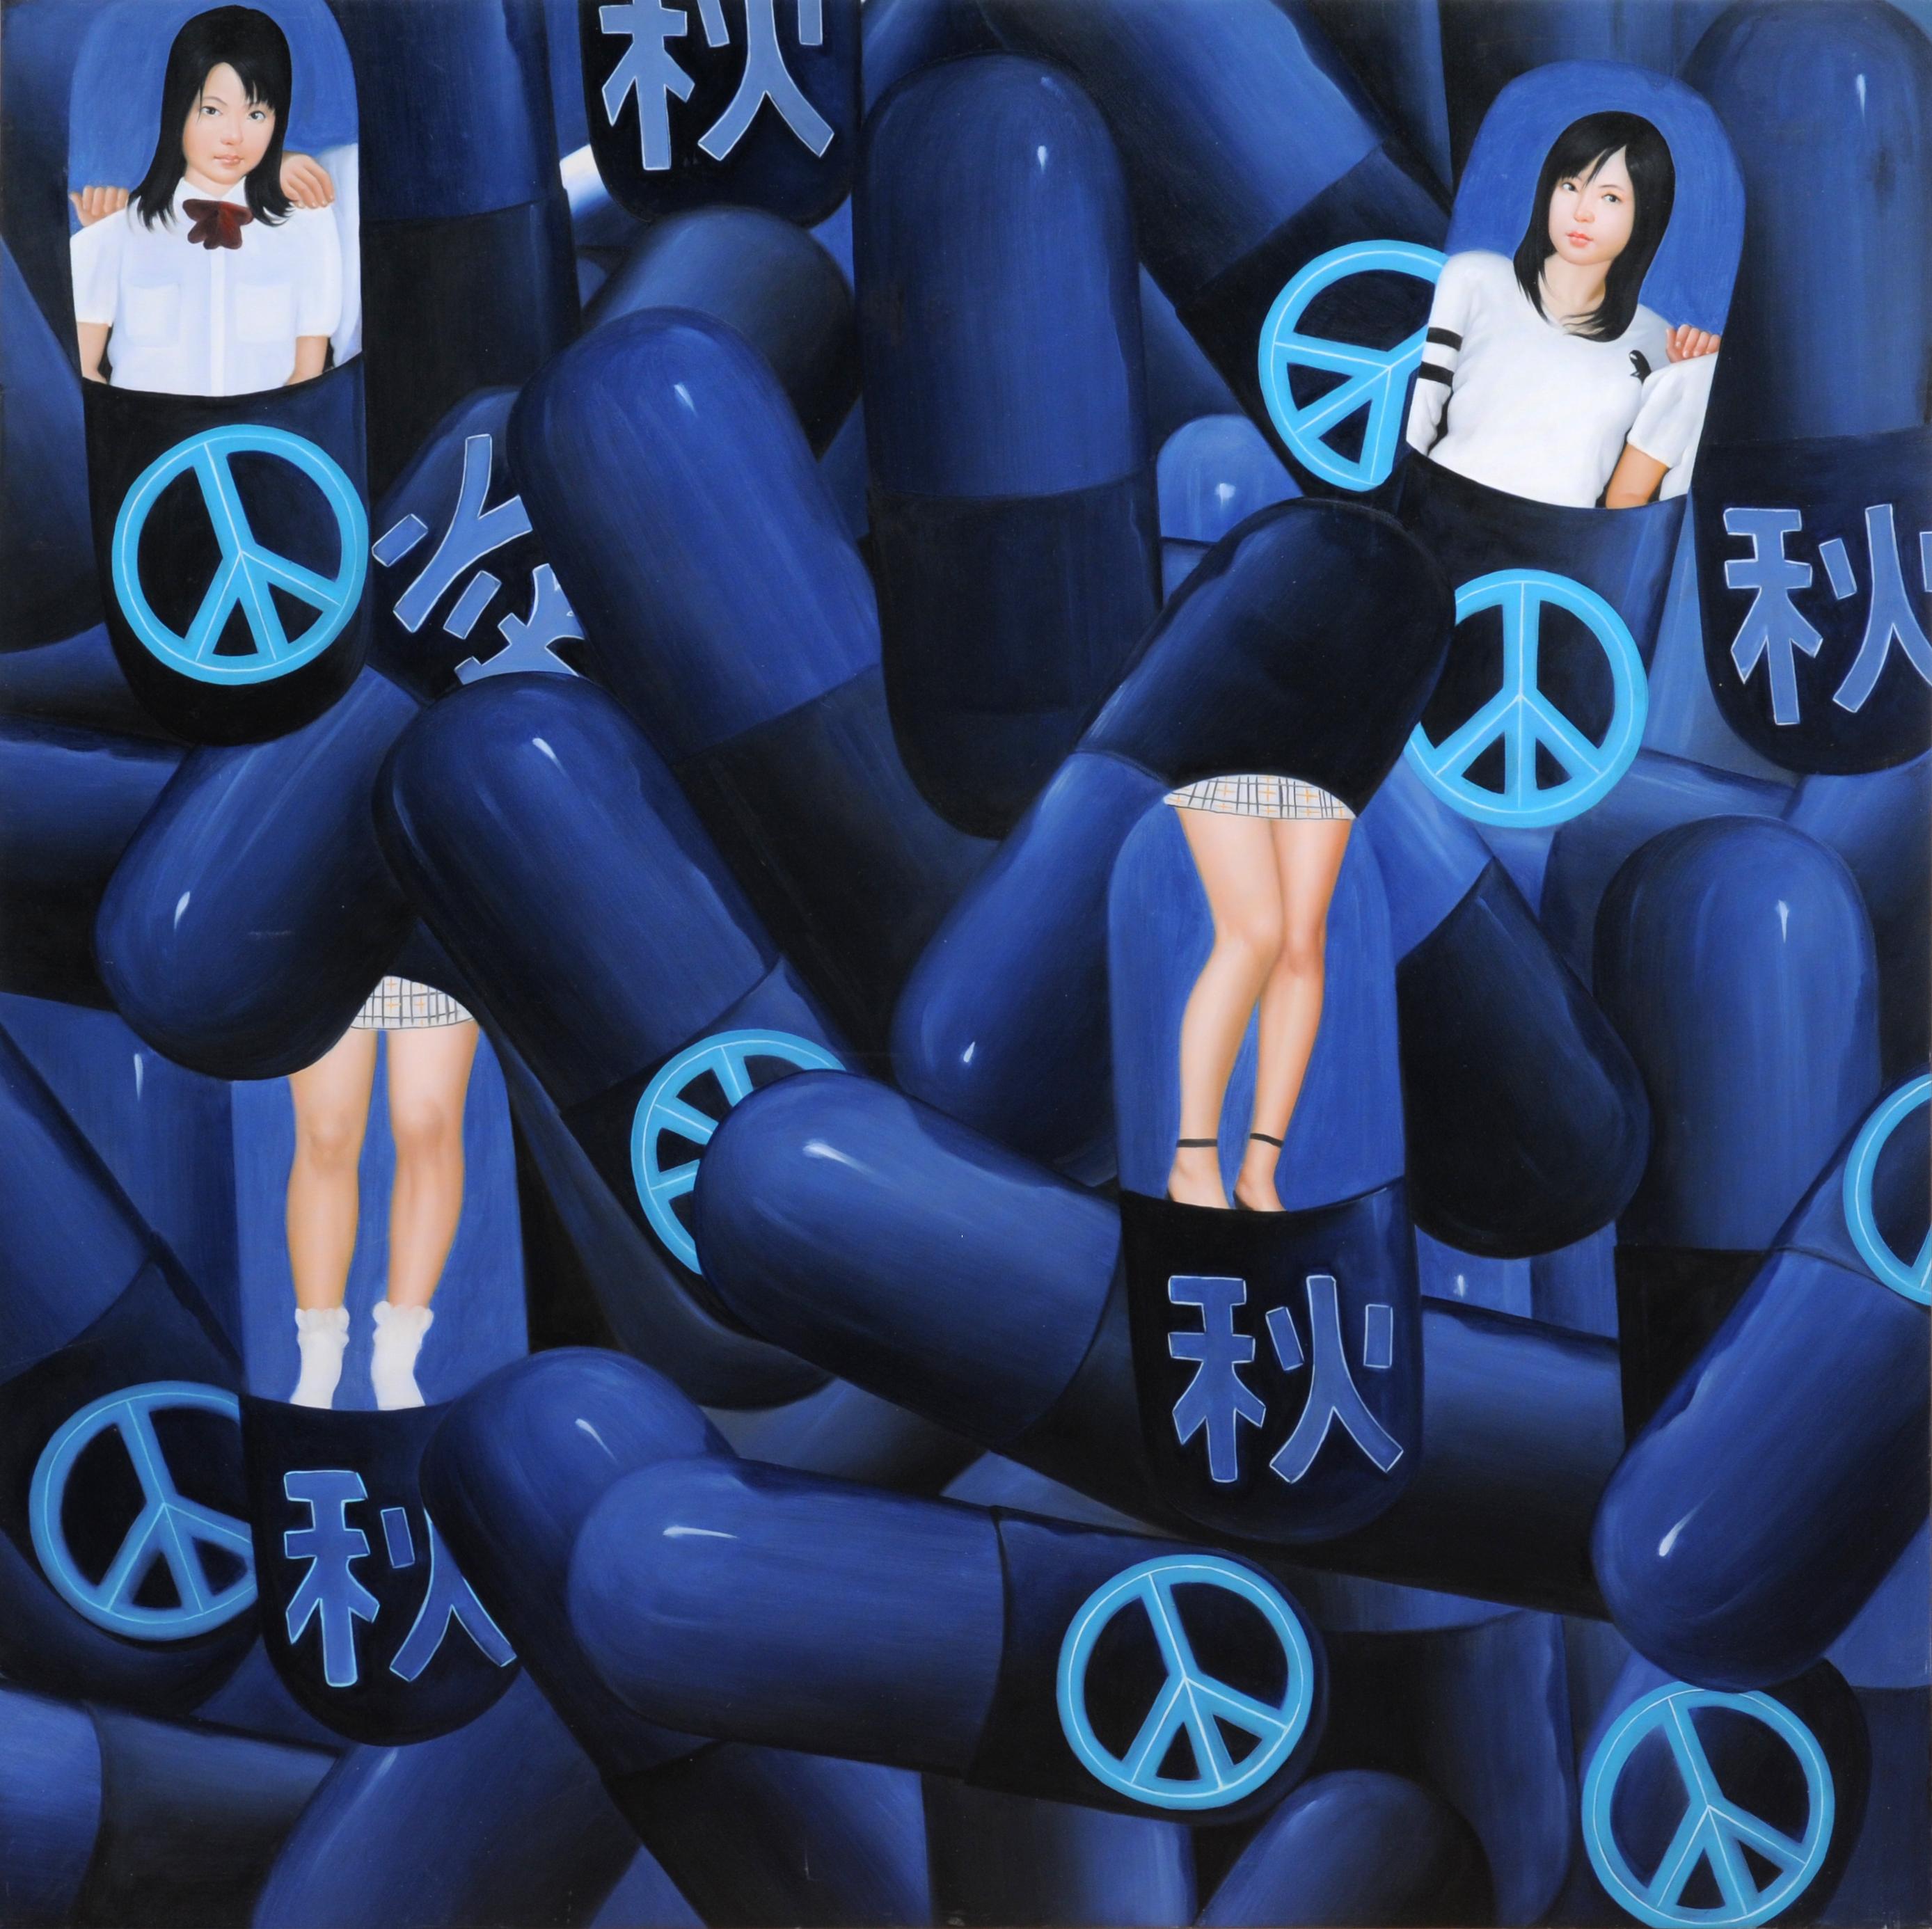 Heartbeat Elixirs : Love Infusions in Couture Capsules - Painting by Tomomi Mishima